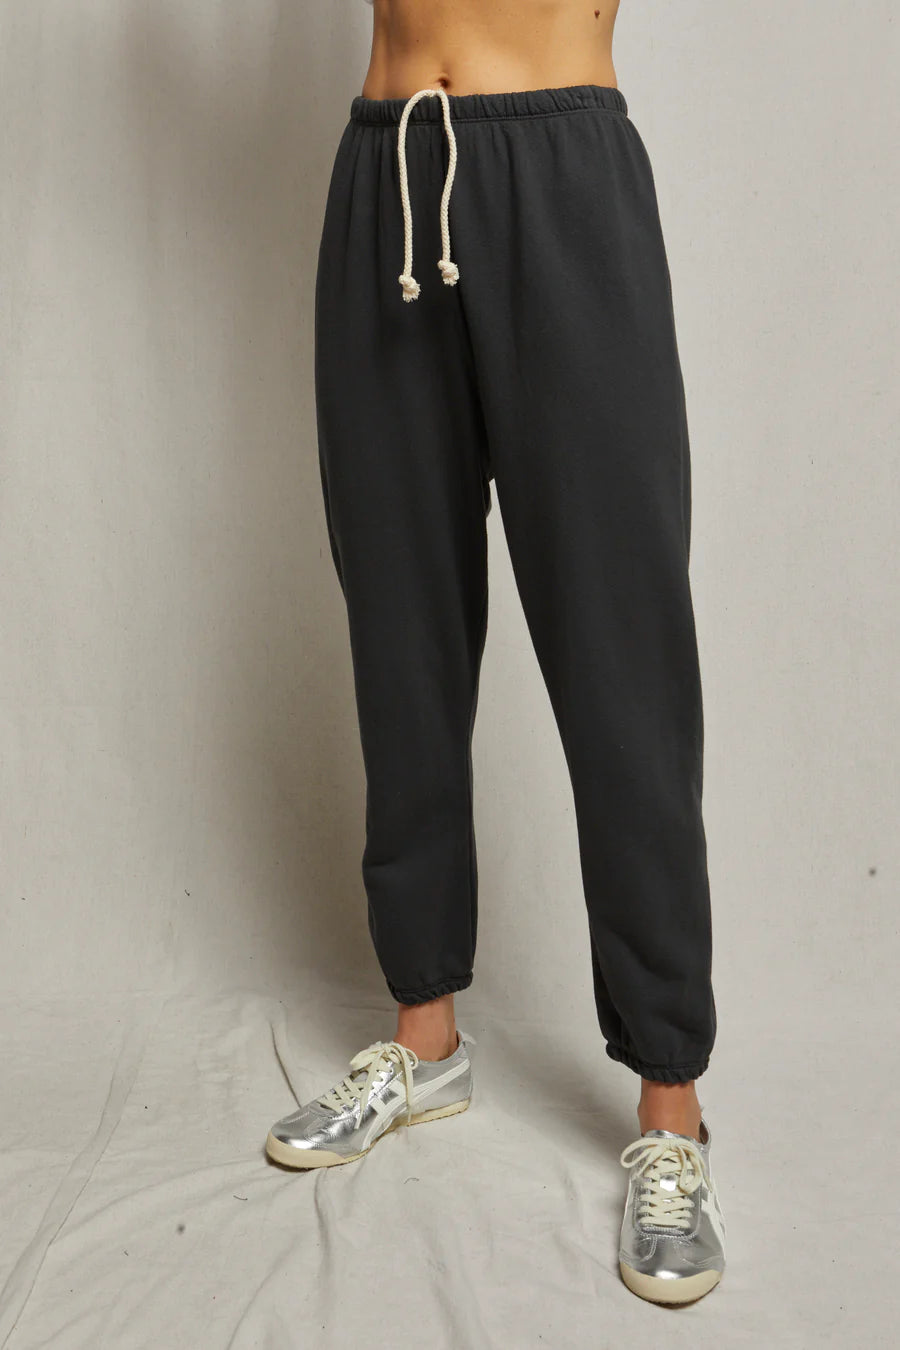 PERFECT WHITE TEE- Johnny French Terry Easy Sweatpant Vintage Black